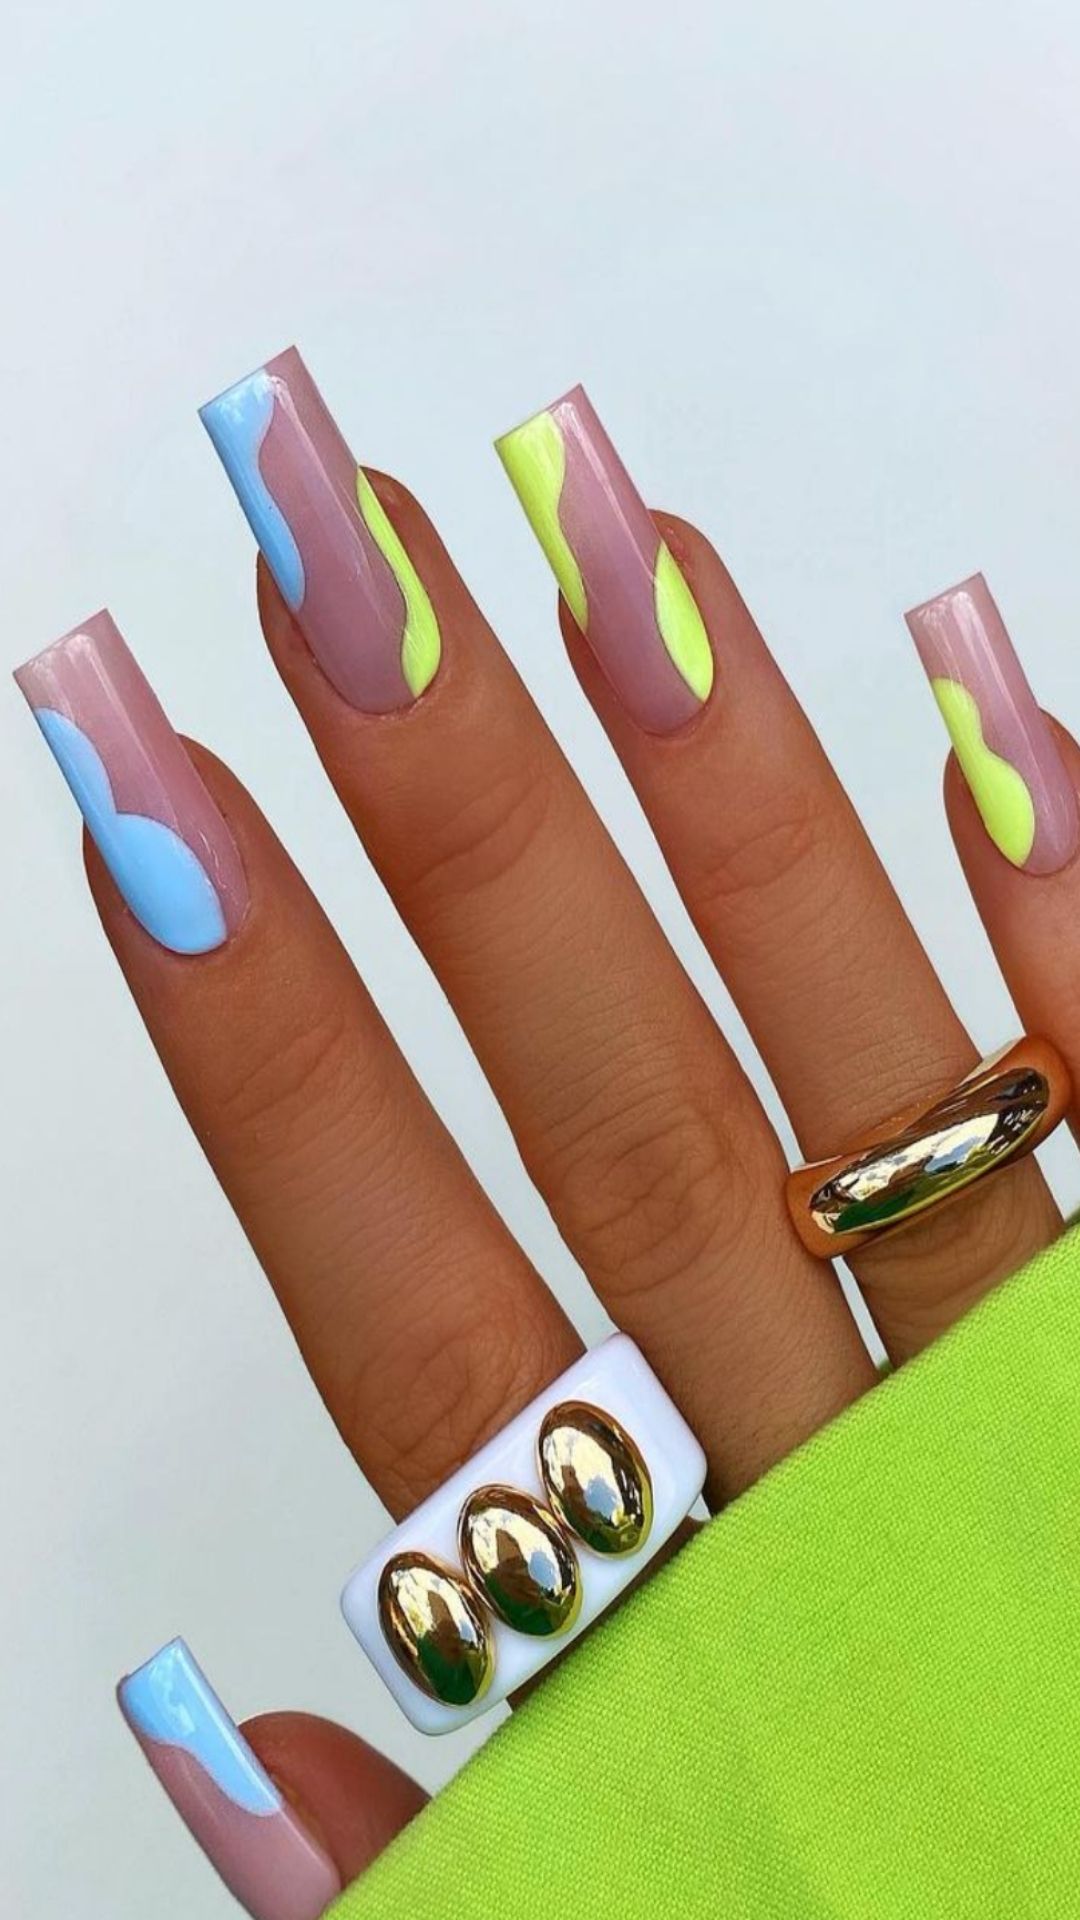 Colored acrylic coffin nails for Summer and Fall 2021! #coffinnails #acrylicnails #fallcoffinnails #summercoffinnail #acryliccoffinnails